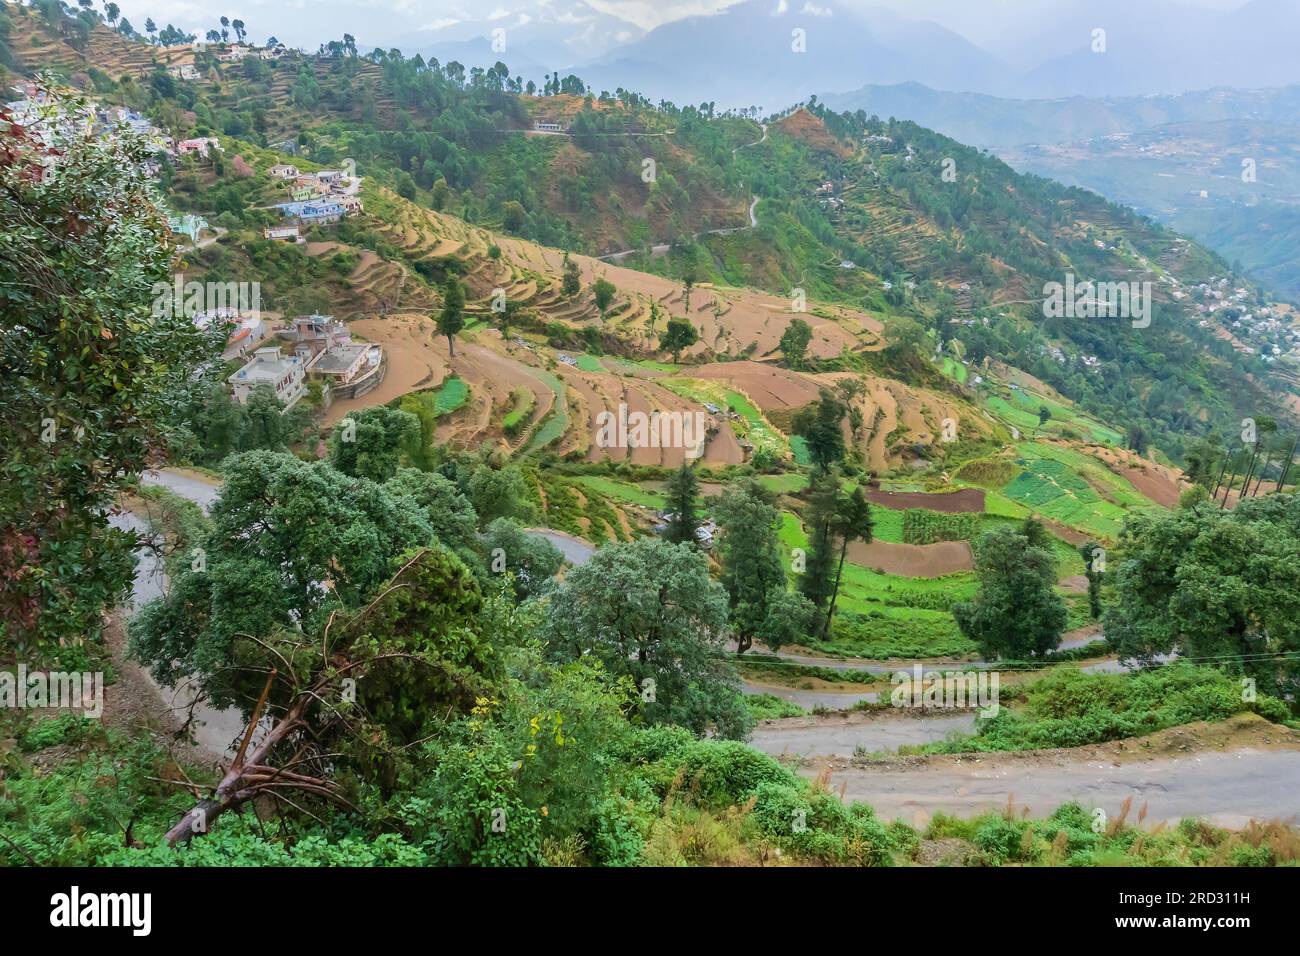 Step agriculture, or terrace agriculture. Steep hills or mountainsides are cut to form level areas for planting of crops. Foggy, misty Himalaya, India Stock Photo